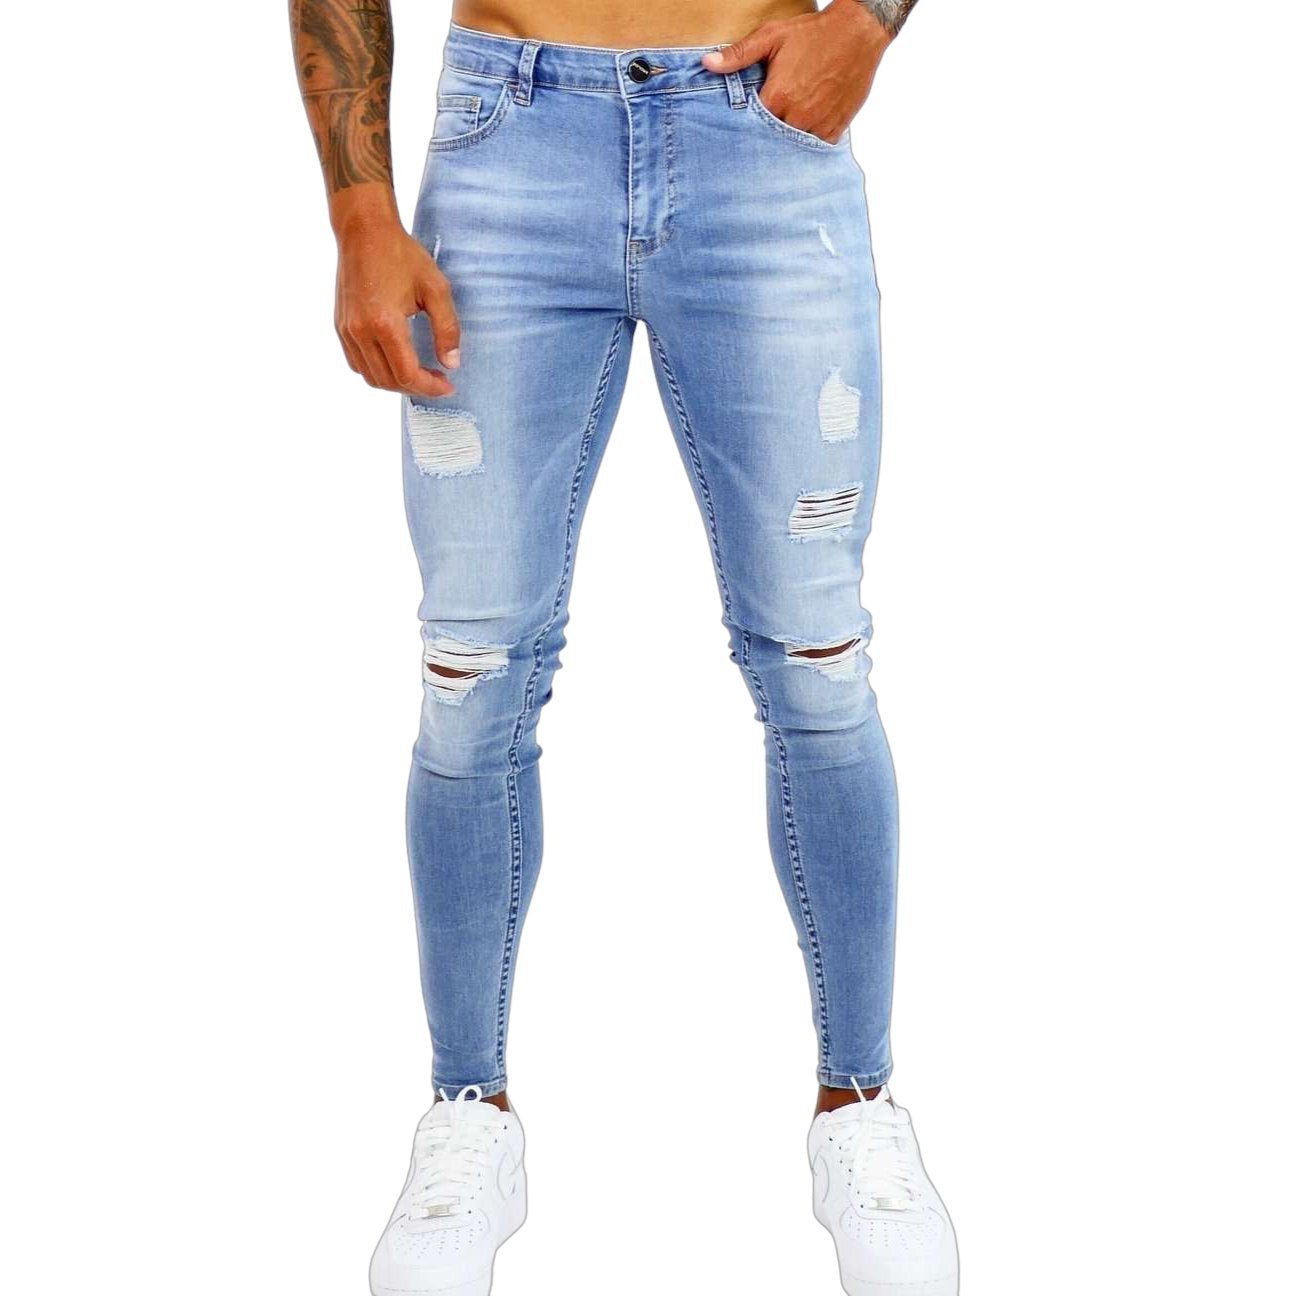 Exible - Light Blue Skinny Jeans for Men - Sarman Fashion - Wholesale Clothing Fashion Brand for Men from Canada